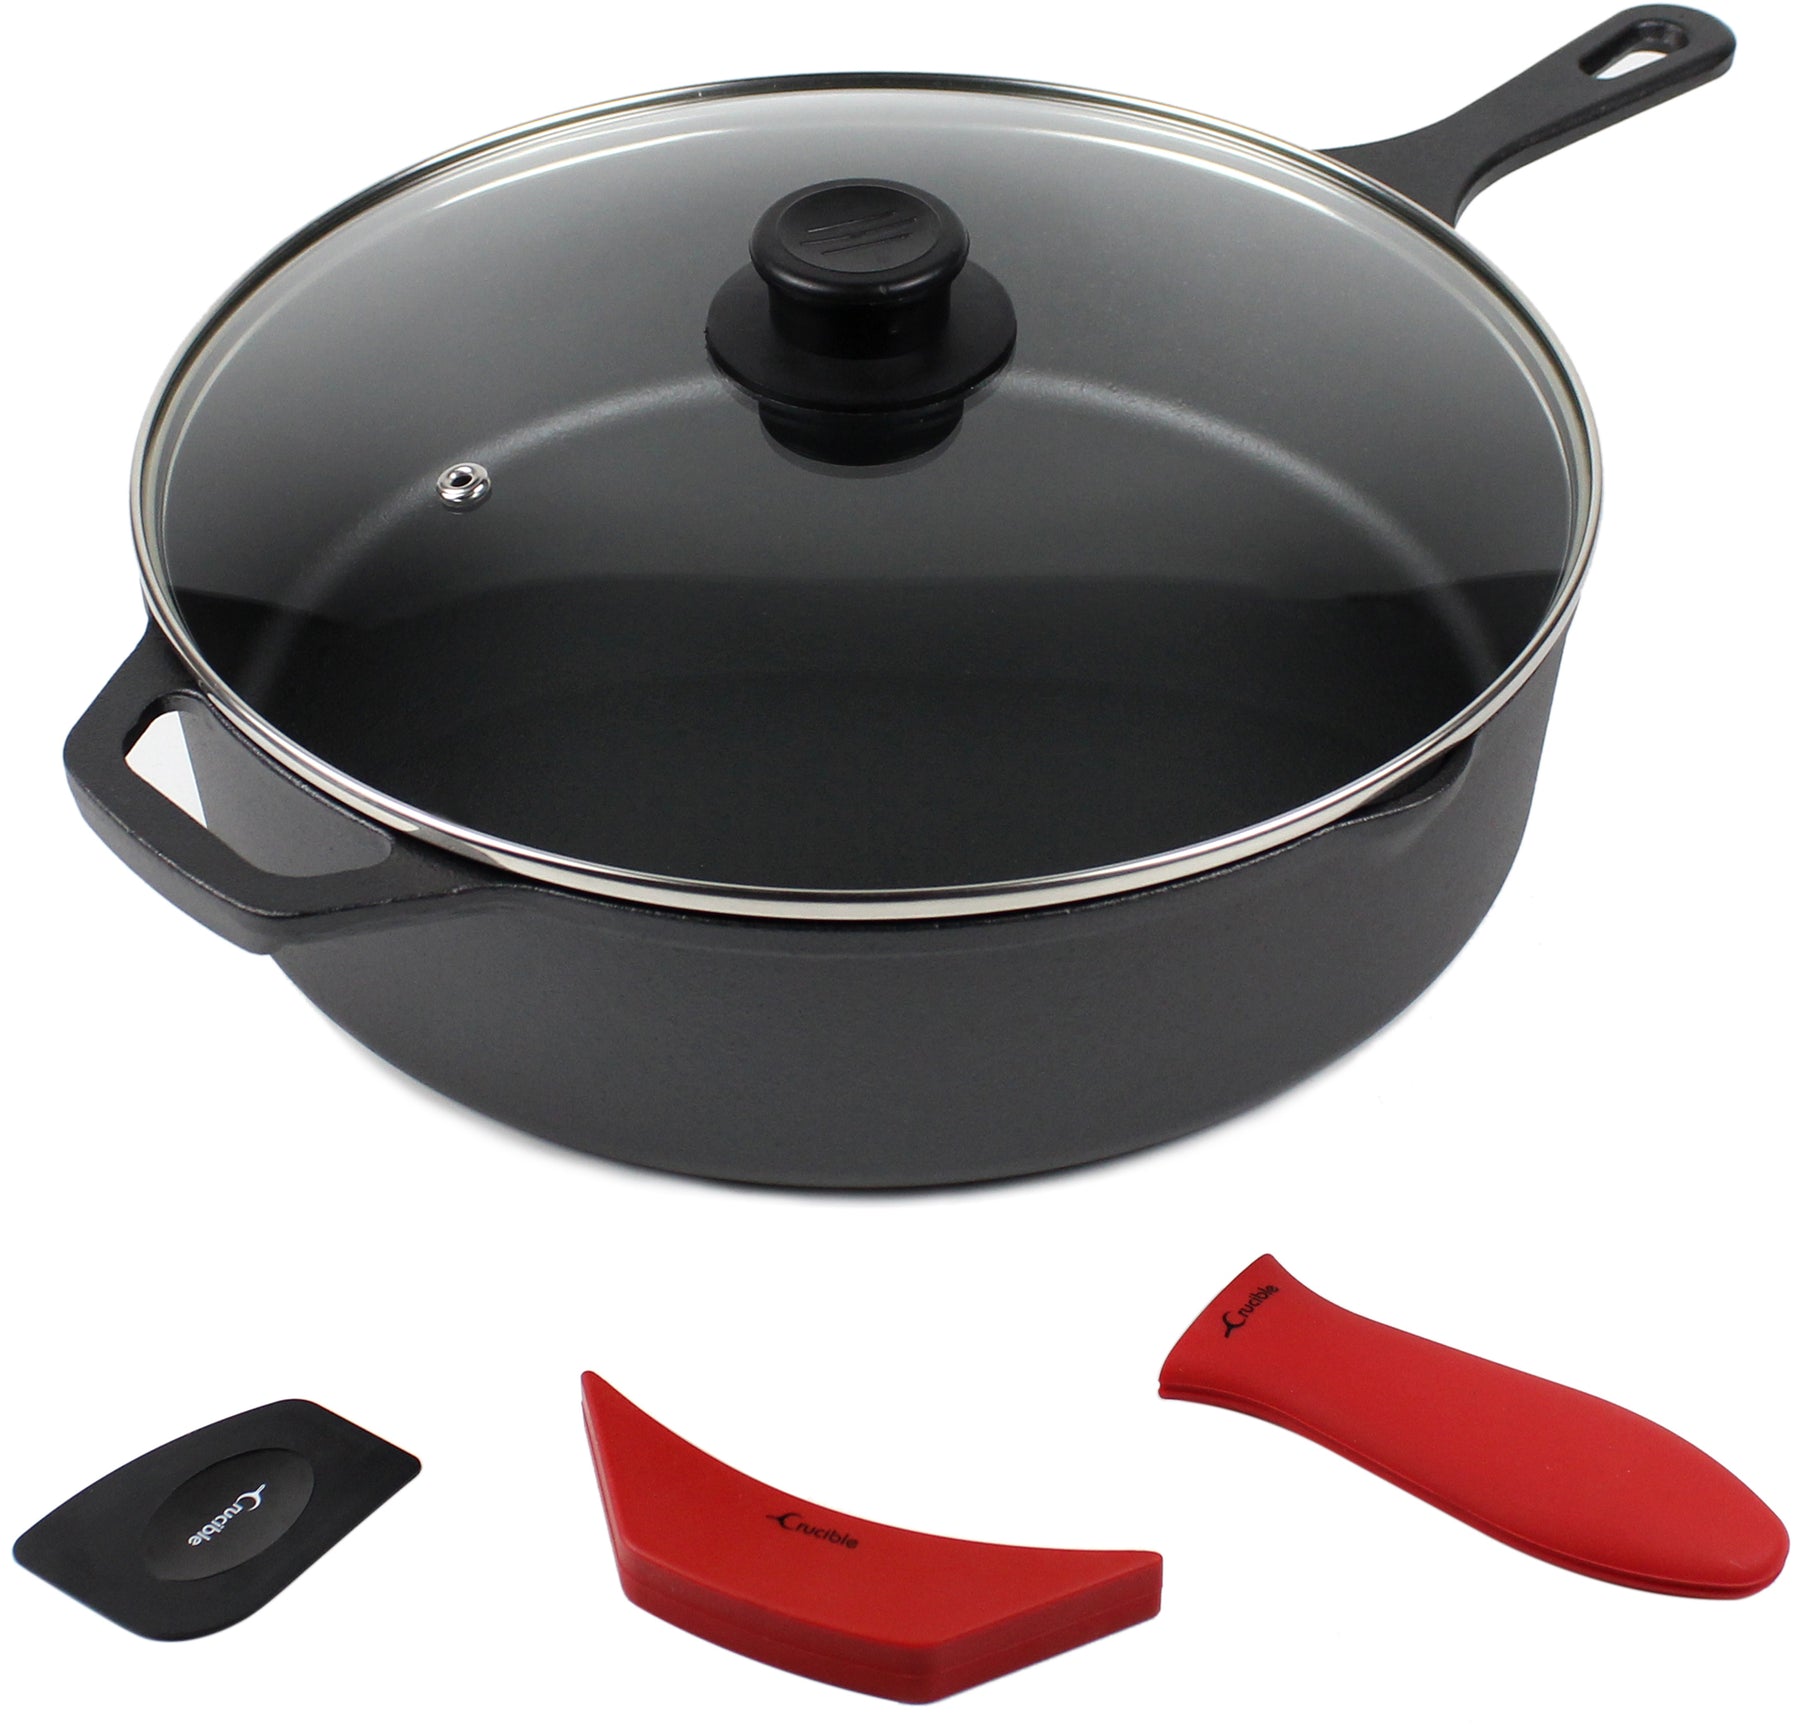 CAST IRON SKILLET with Glass Lid Frying Pan Scraper Silicone Handle 12  CUISINEL